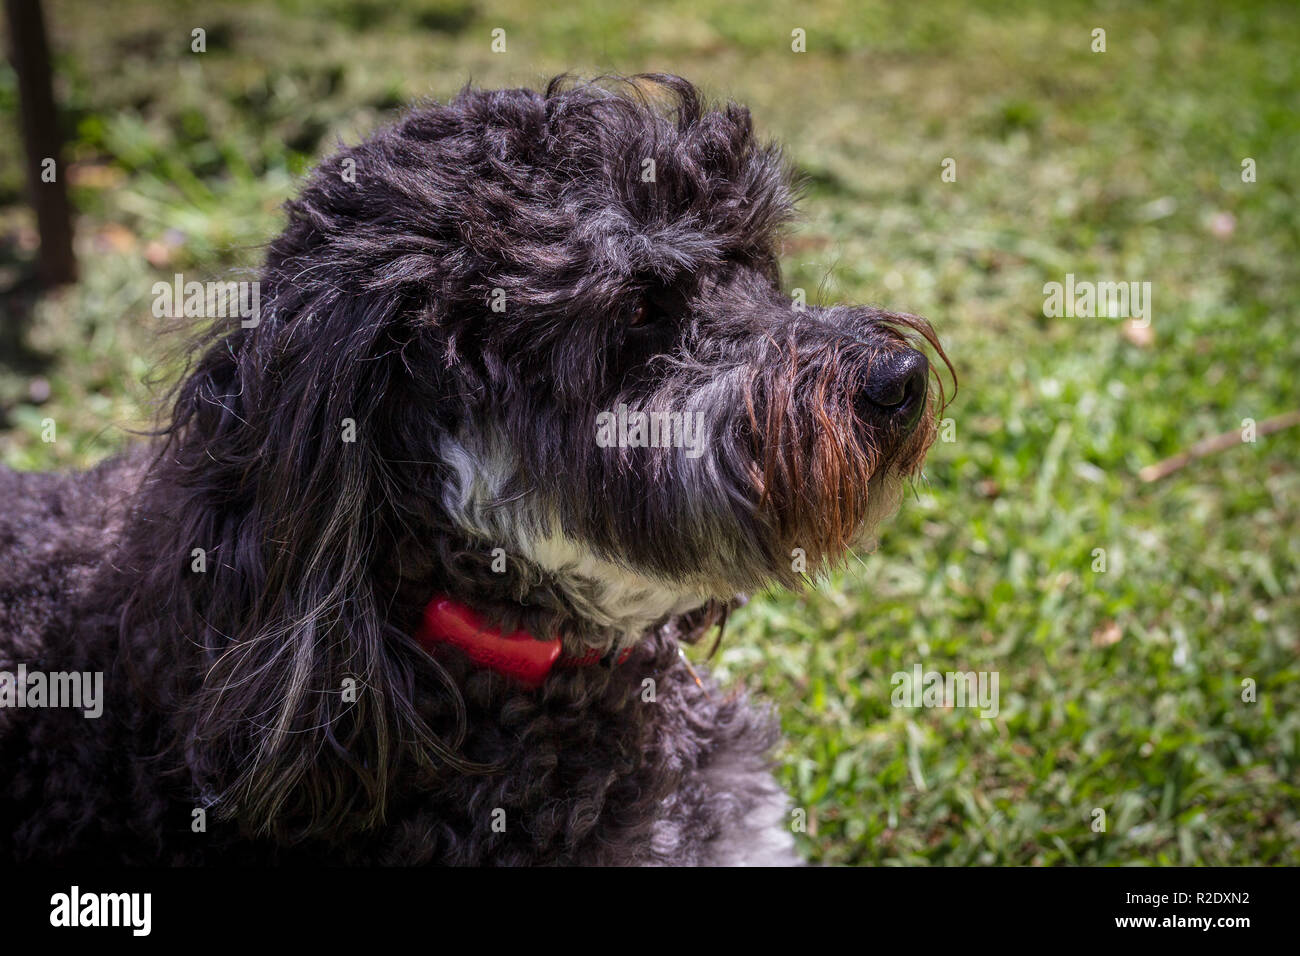 Close up of dog wearing red dog fitness tracker (Fitbark) on its collar, a pet lifestyle gadget which monitors the dogs activity levels, sleep, health Stock Photo